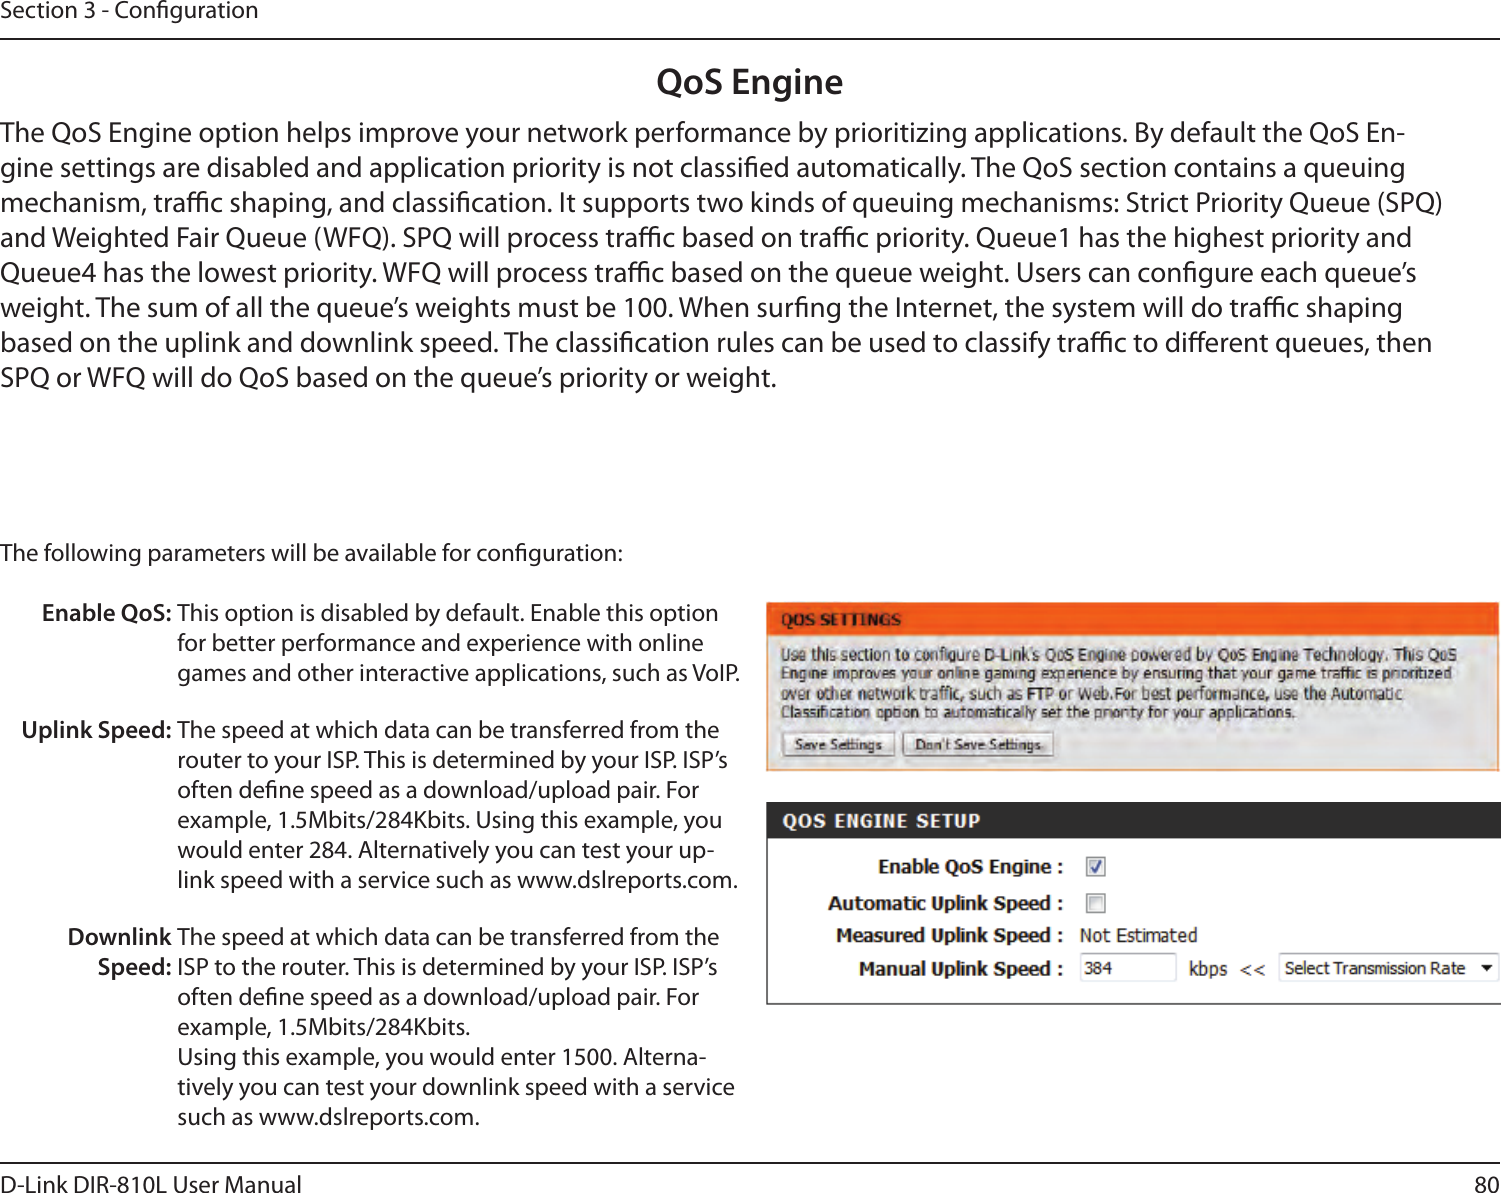 80D-Link DIR-810L User ManualSection 3 - CongurationQoS EngineThe QoS Engine option helps improve your network performance by prioritizing applications. By default the QoS En-gine settings are disabled and application priority is not classied automatically. The QoS section contains a queuing mechanism, trac shaping, and classication. It supports two kinds of queuing mechanisms: Strict Priority Queue (SPQ) and Weighted Fair Queue (WFQ). SPQ will process trac based on trac priority. Queue1 has the highest priority and Queue4 has the lowest priority. WFQ will process trac based on the queue weight. Users can congure each queue’s weight. The sum of all the queue’s weights must be 100. When surng the Internet, the system will do trac shaping based on the uplink and downlink speed. The classication rules can be used to classify trac to dierent queues, then SPQ or WFQ will do QoS based on the queue’s priority or weight.The following parameters will be available for conguration:Enable QoS: This option is disabled by default. Enable this option for better performance and experience with online games and other interactive applications, such as VoIP.Uplink Speed: The speed at which data can be transferred from the router to your ISP. This is determined by your ISP. ISP’s often dene speed as a download/upload pair. For example, 1.5Mbits/284Kbits. Using this example, you would enter 284. Alternatively you can test your up-link speed with a service such as www.dslreports.com.Downlink Speed:The speed at which data can be transferred from the ISP to the router. This is determined by your ISP. ISP’s often dene speed as a download/upload pair. For example, 1.5Mbits/284Kbits. Using this example, you would enter 1500. Alterna-tively you can test your downlink speed with a service such as www.dslreports.com.